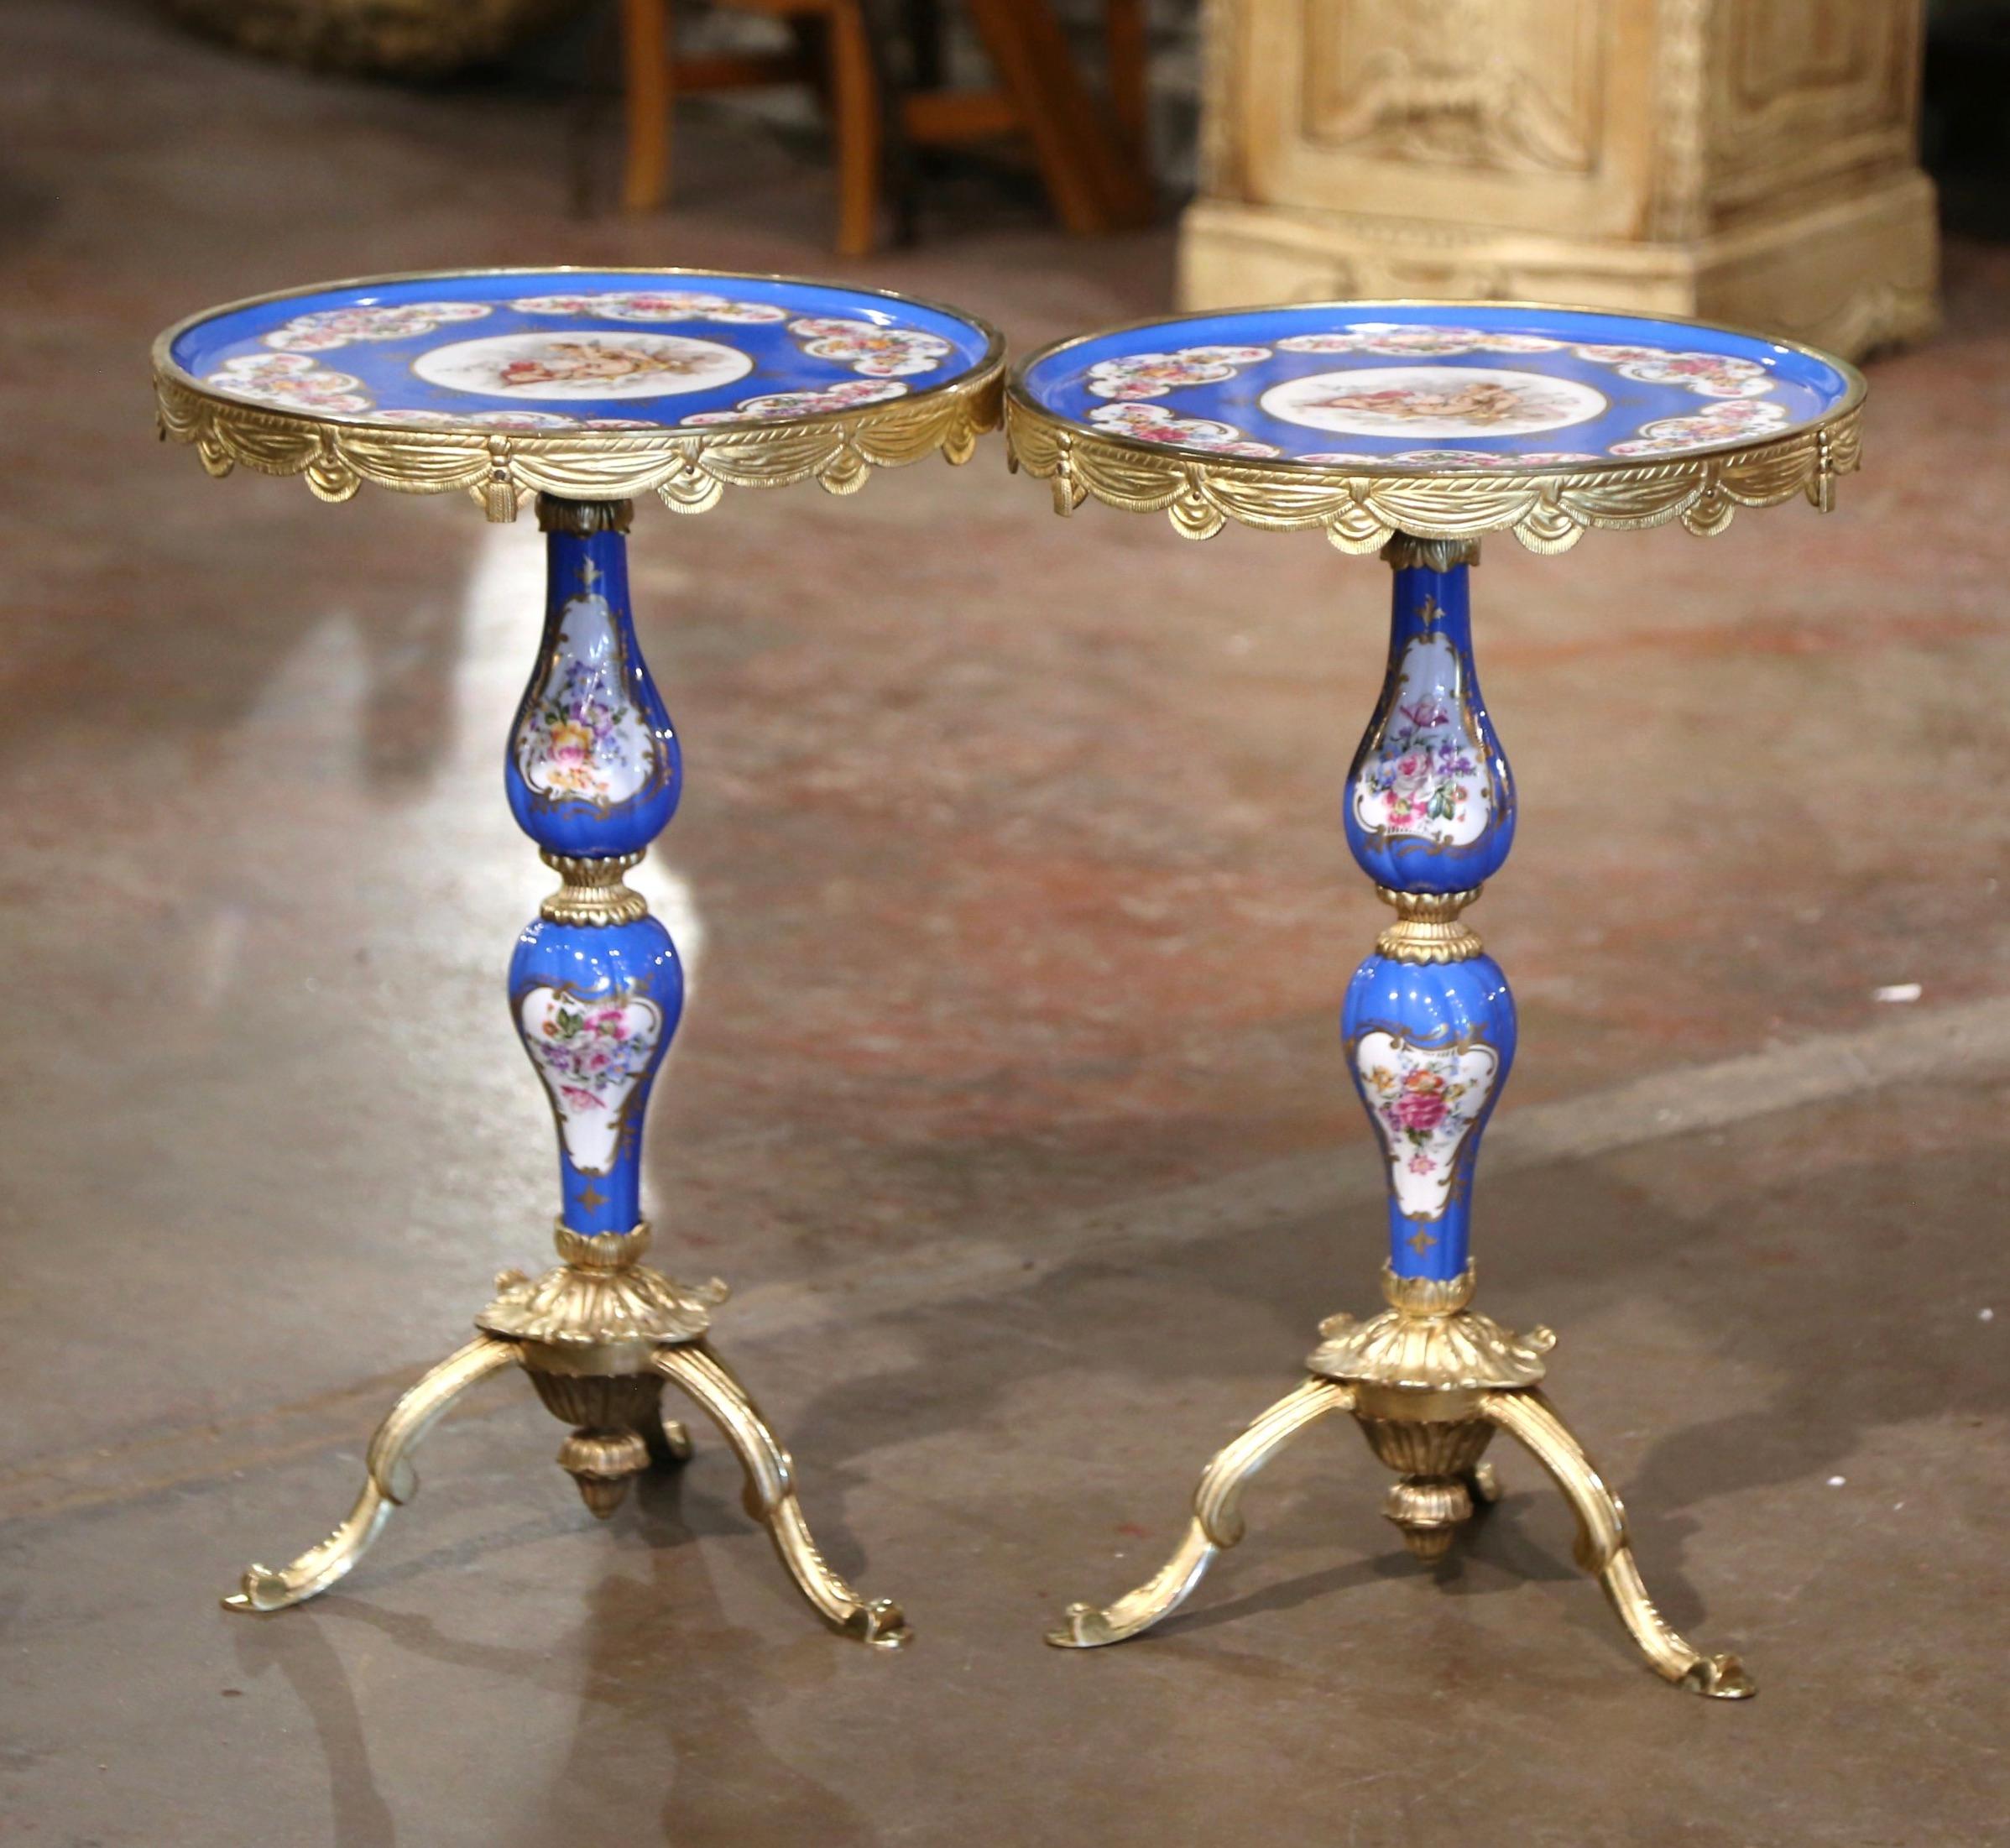 20th Century Pair of Mid-Century French Sevres Porcelain and Bronze Dore Martini Side Tables